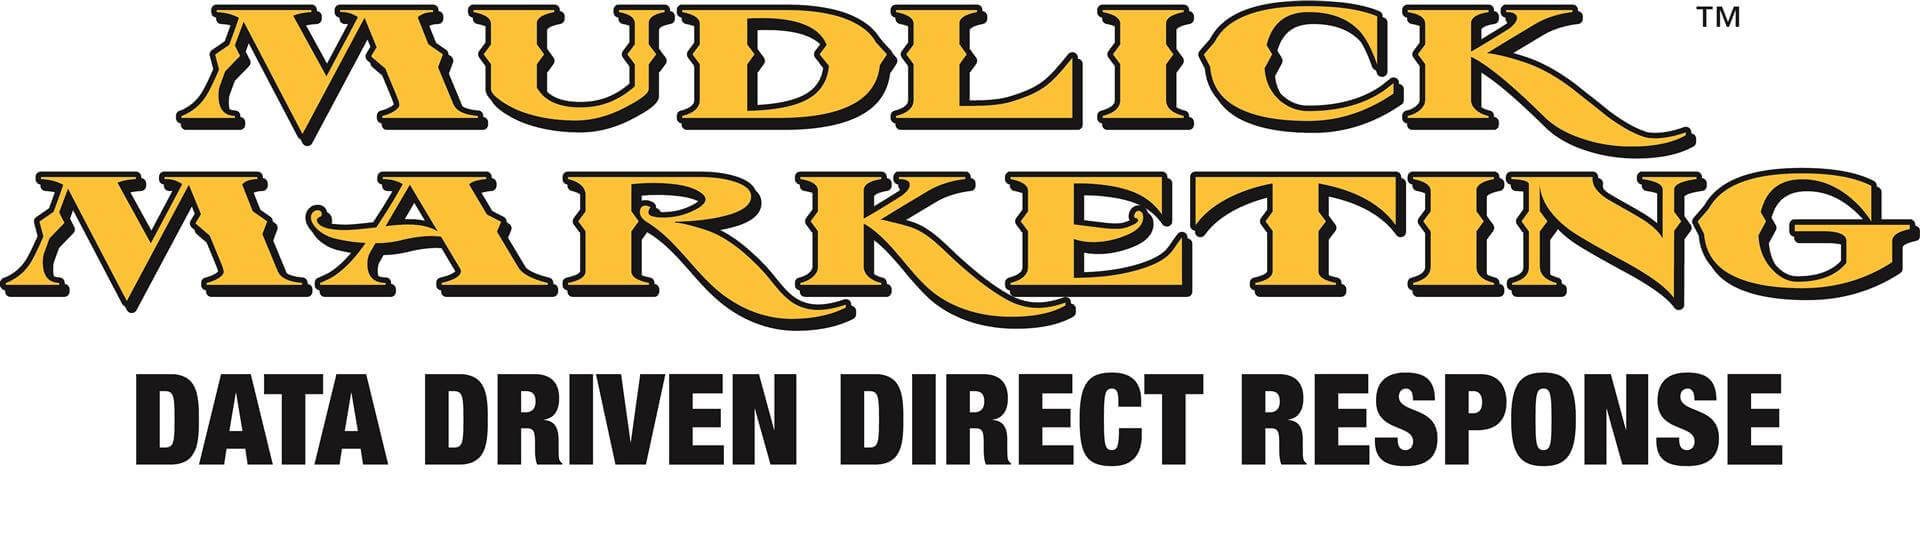 Automotive Service Councils of California Proudly Announces New Corporate Partnership with Mudlick Marketing